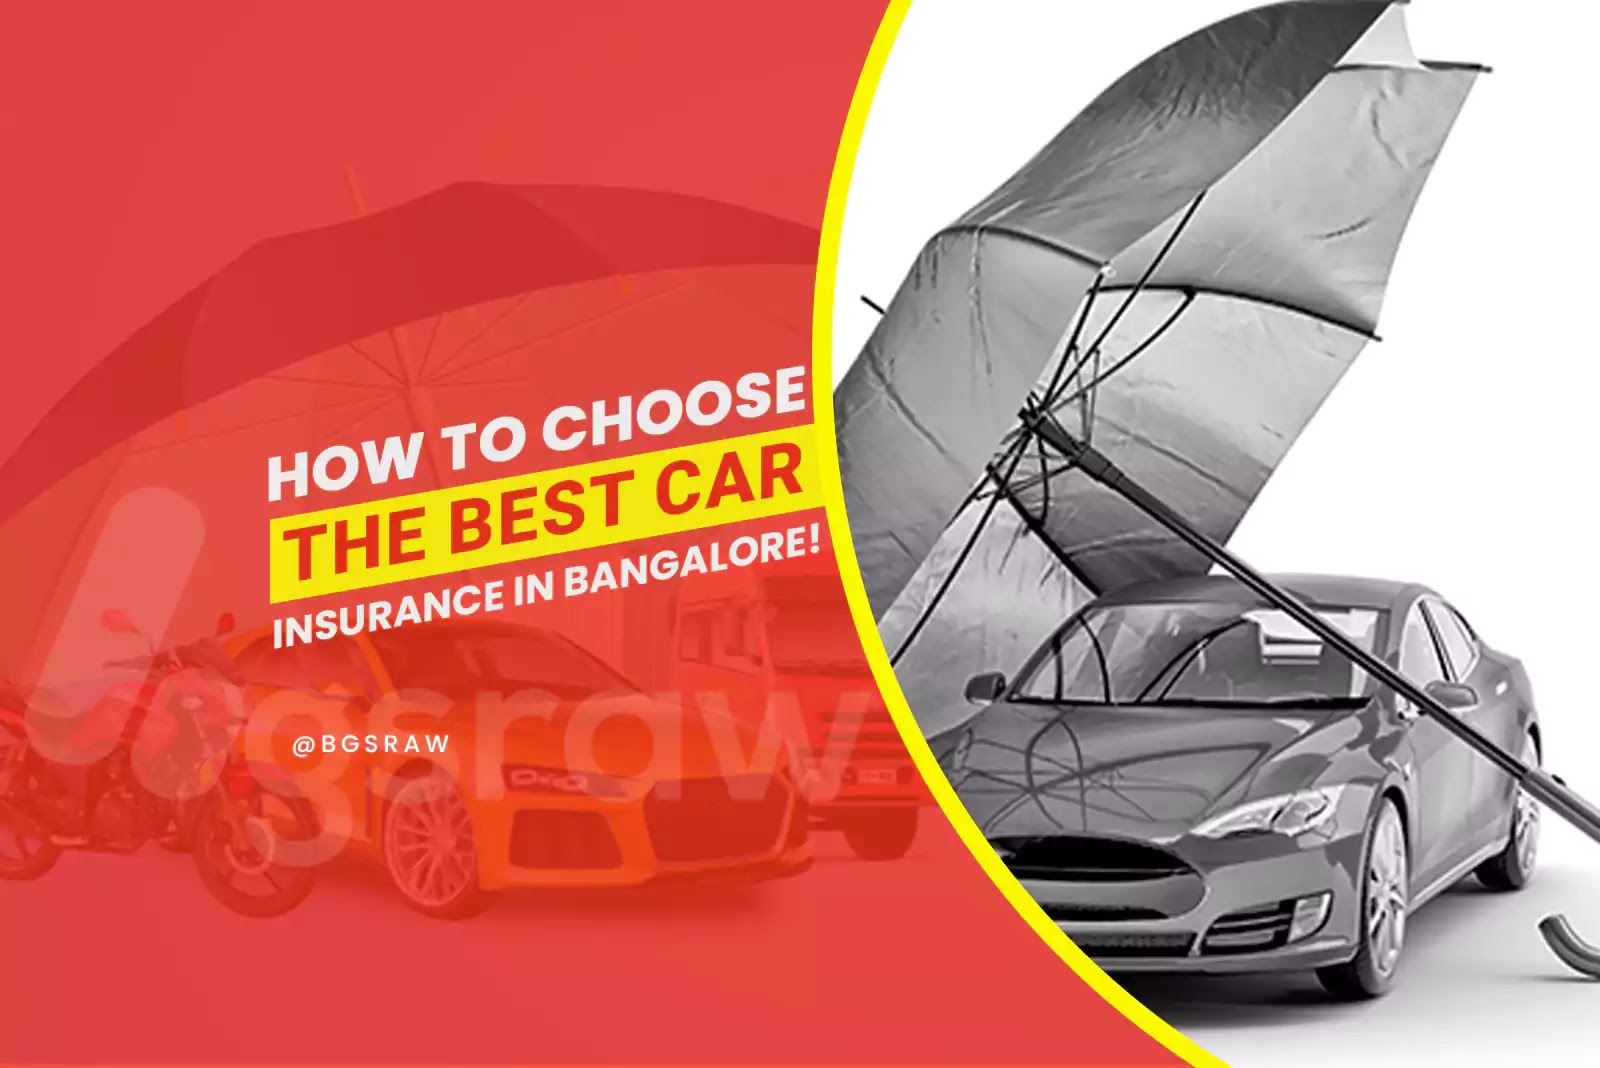 How To Choose The best car insurance company in bangalore, 7 things to know